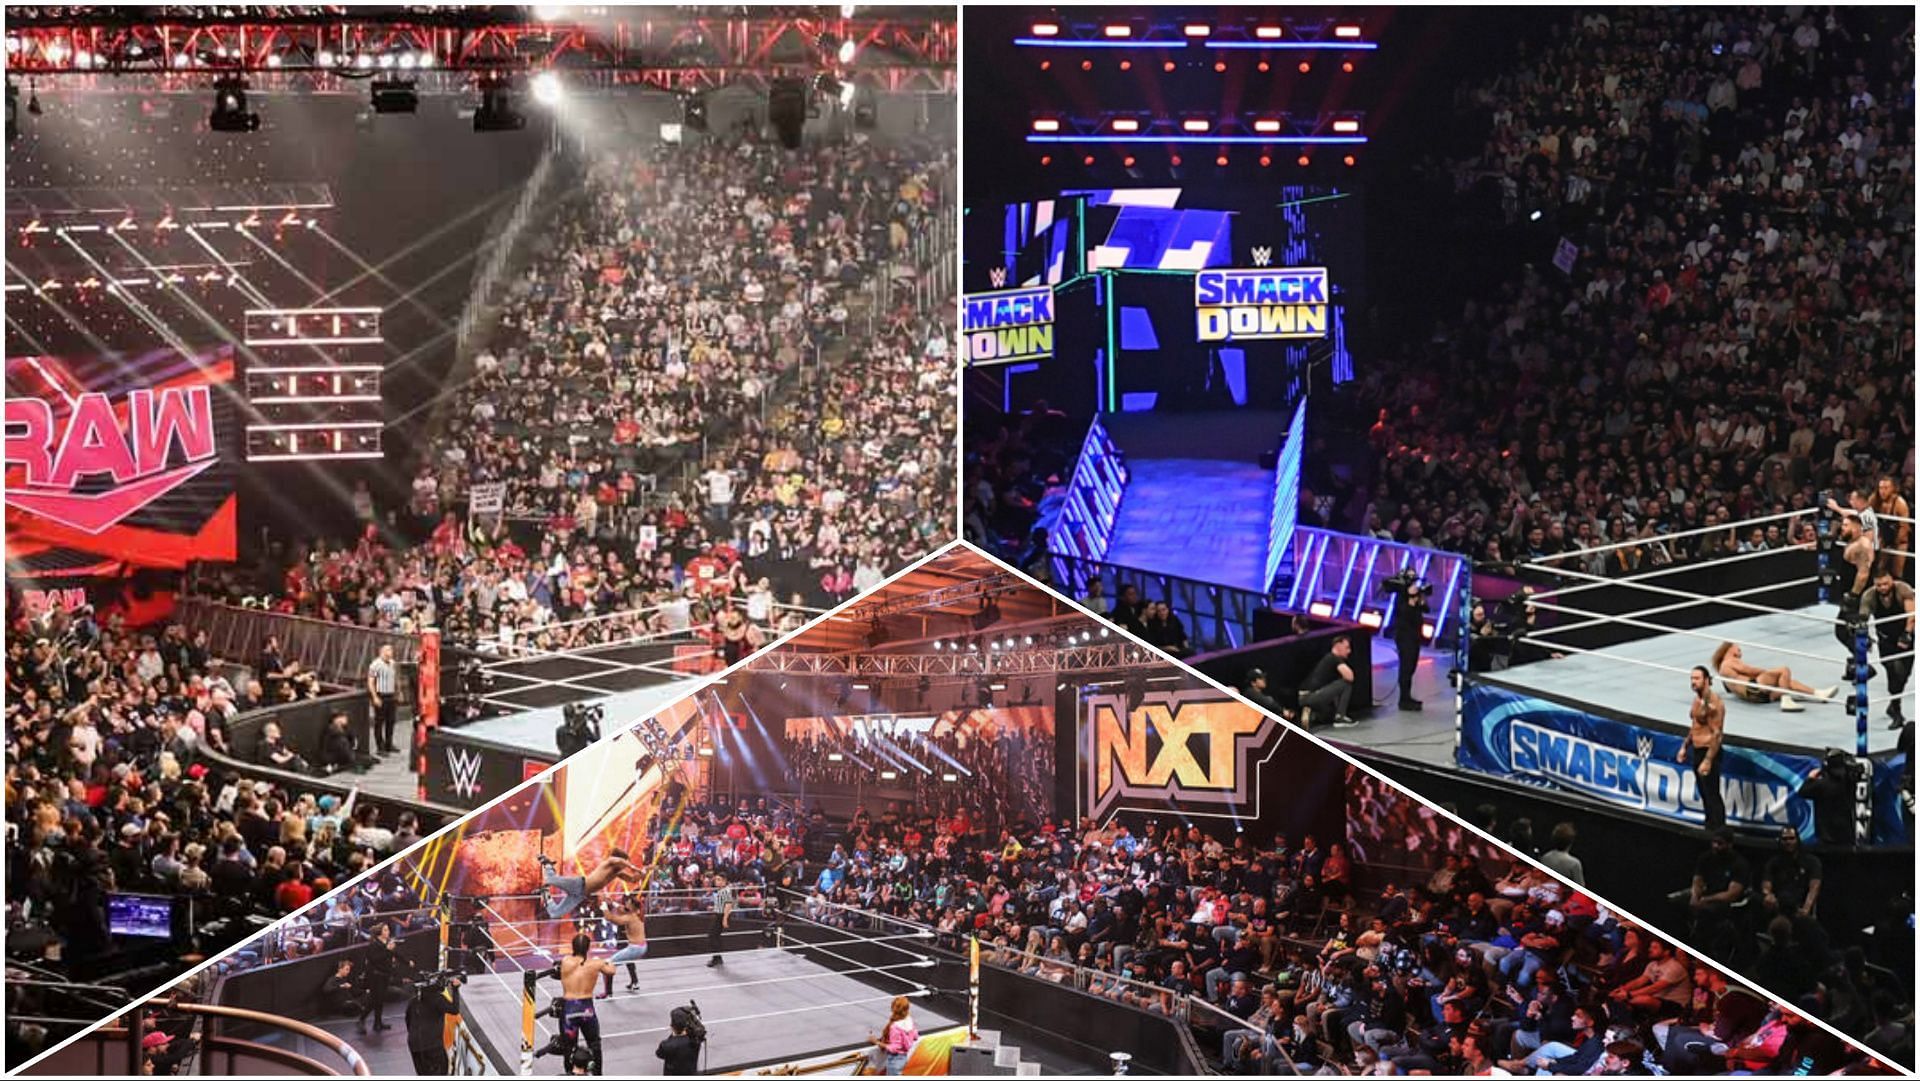 A look at the arenas for WWE